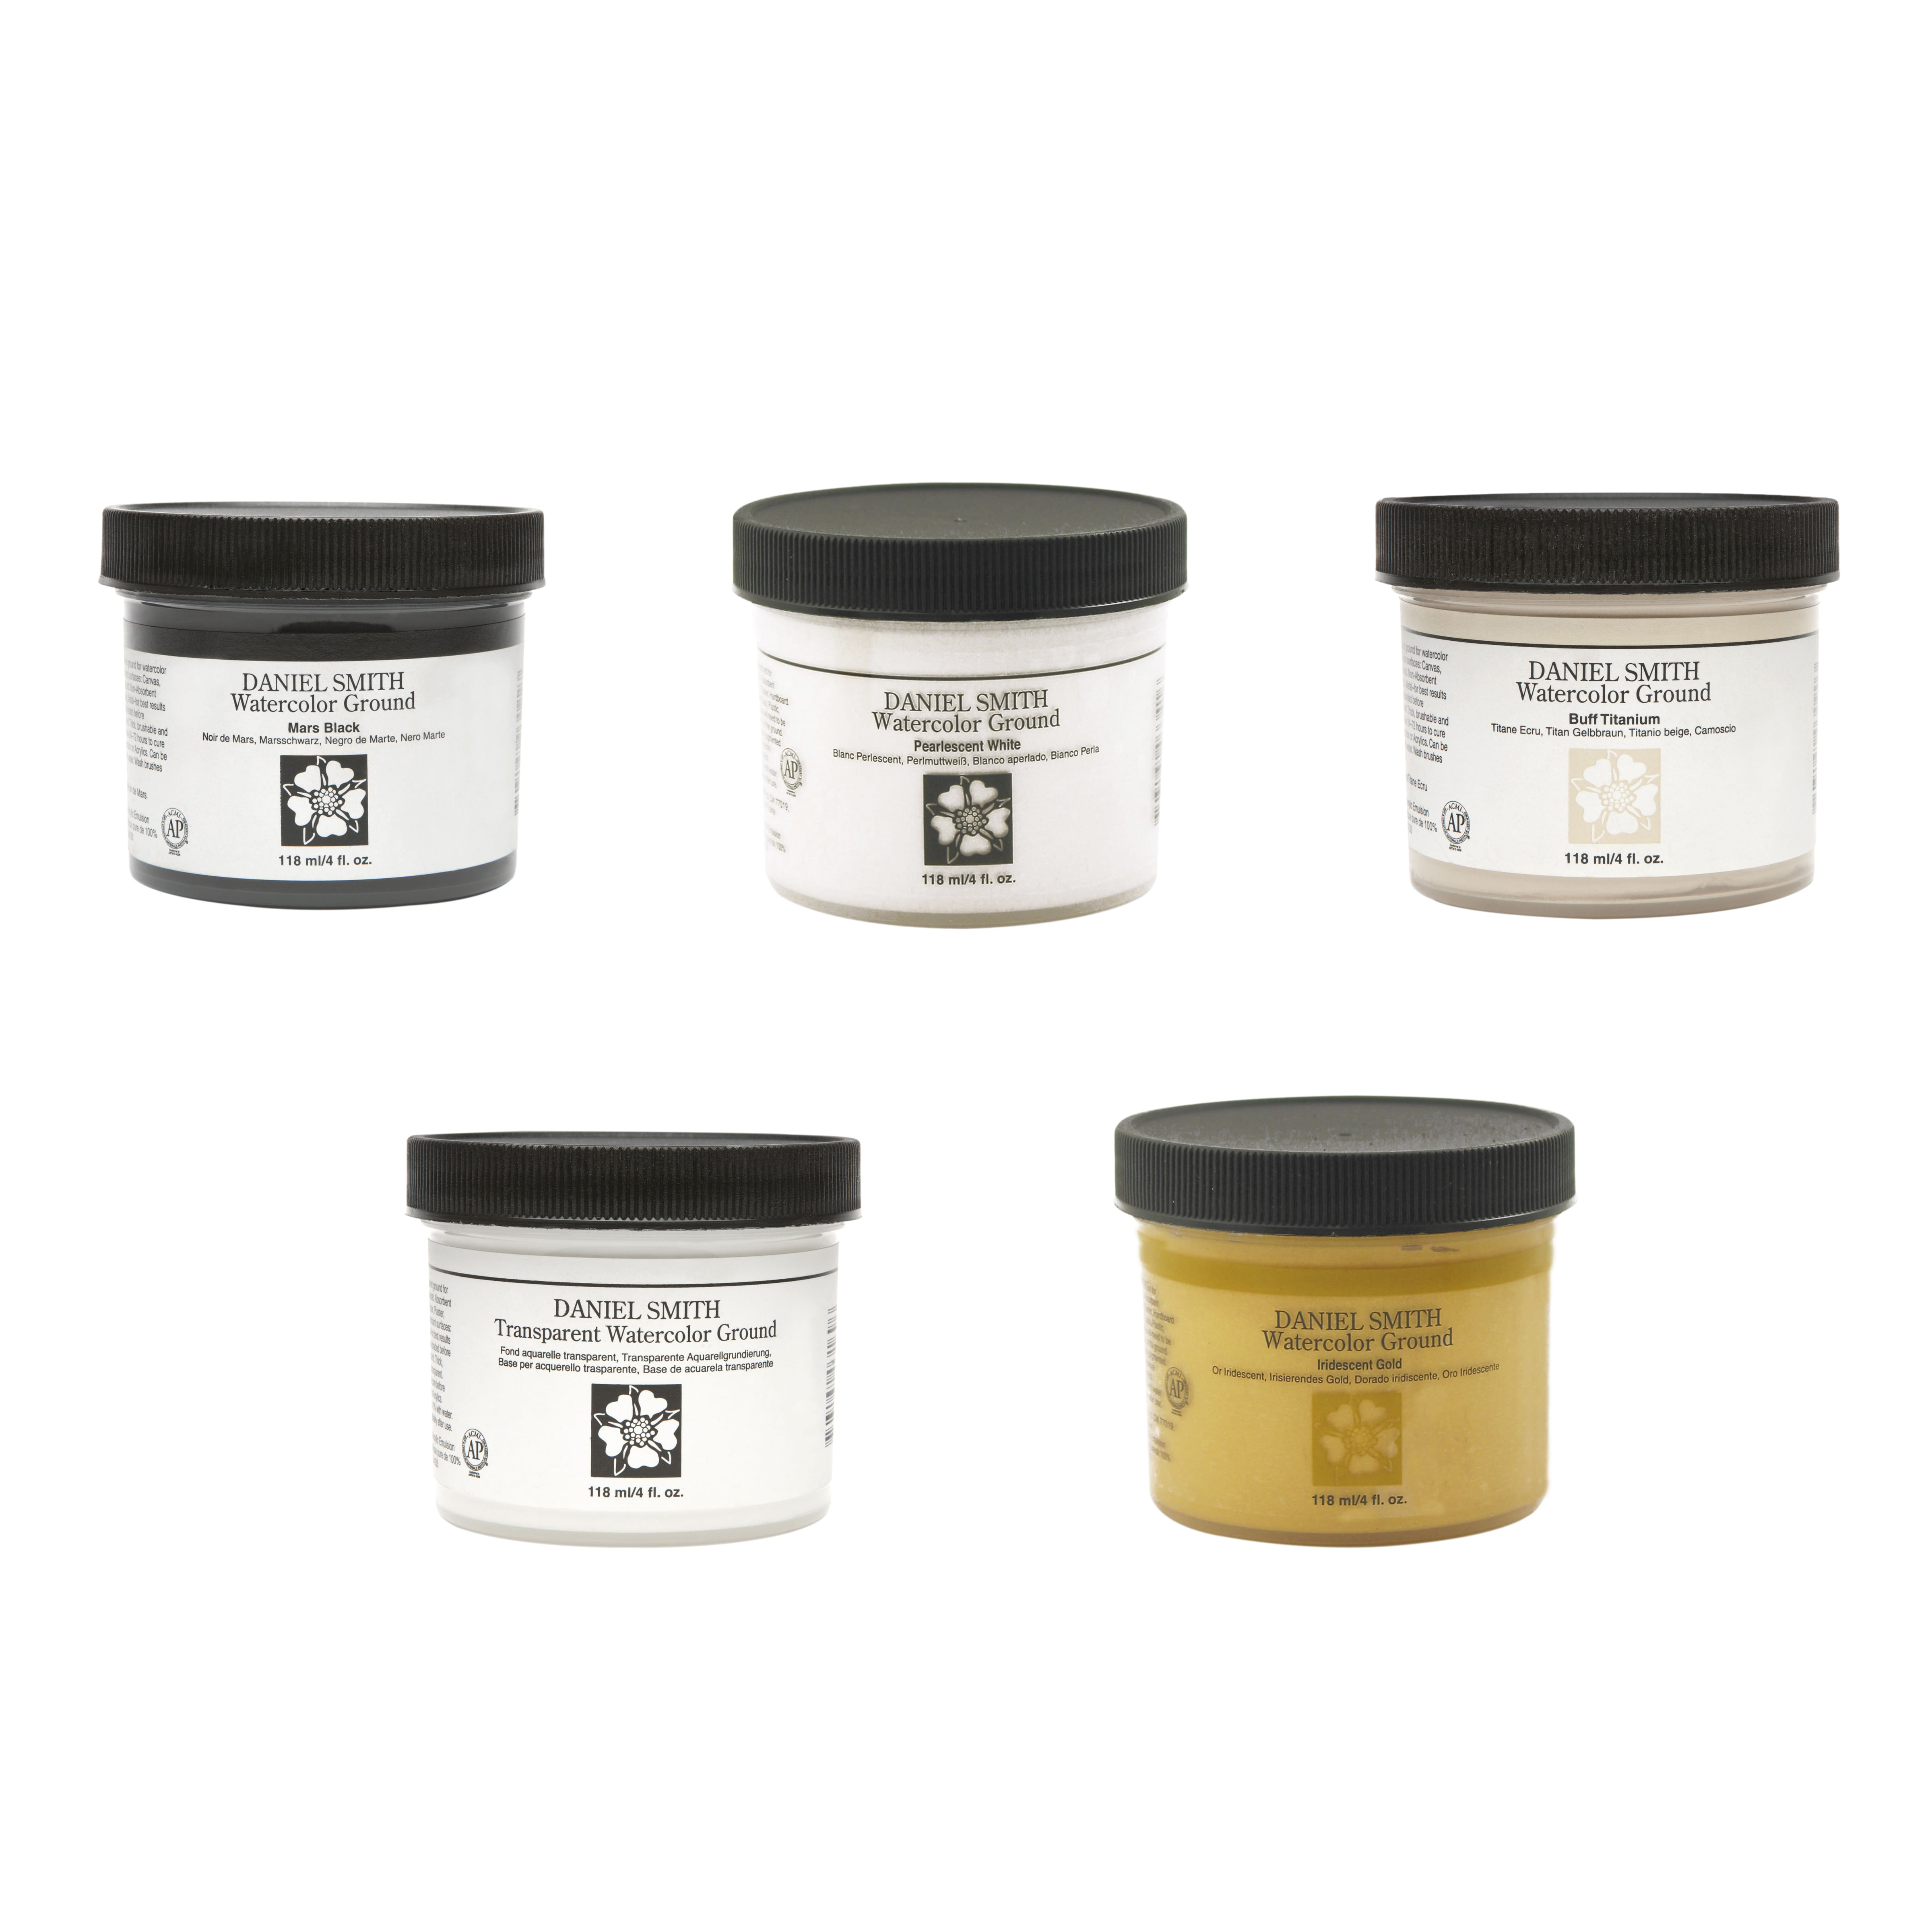 Daniel Smith Watercolor Ground - Sampler Set of 5 - 4oz Jars For Using  Watercolors On Any Surface Mars Black, Pearlescent White, Buff Titanium,  Transparent, Iridescent Gold 